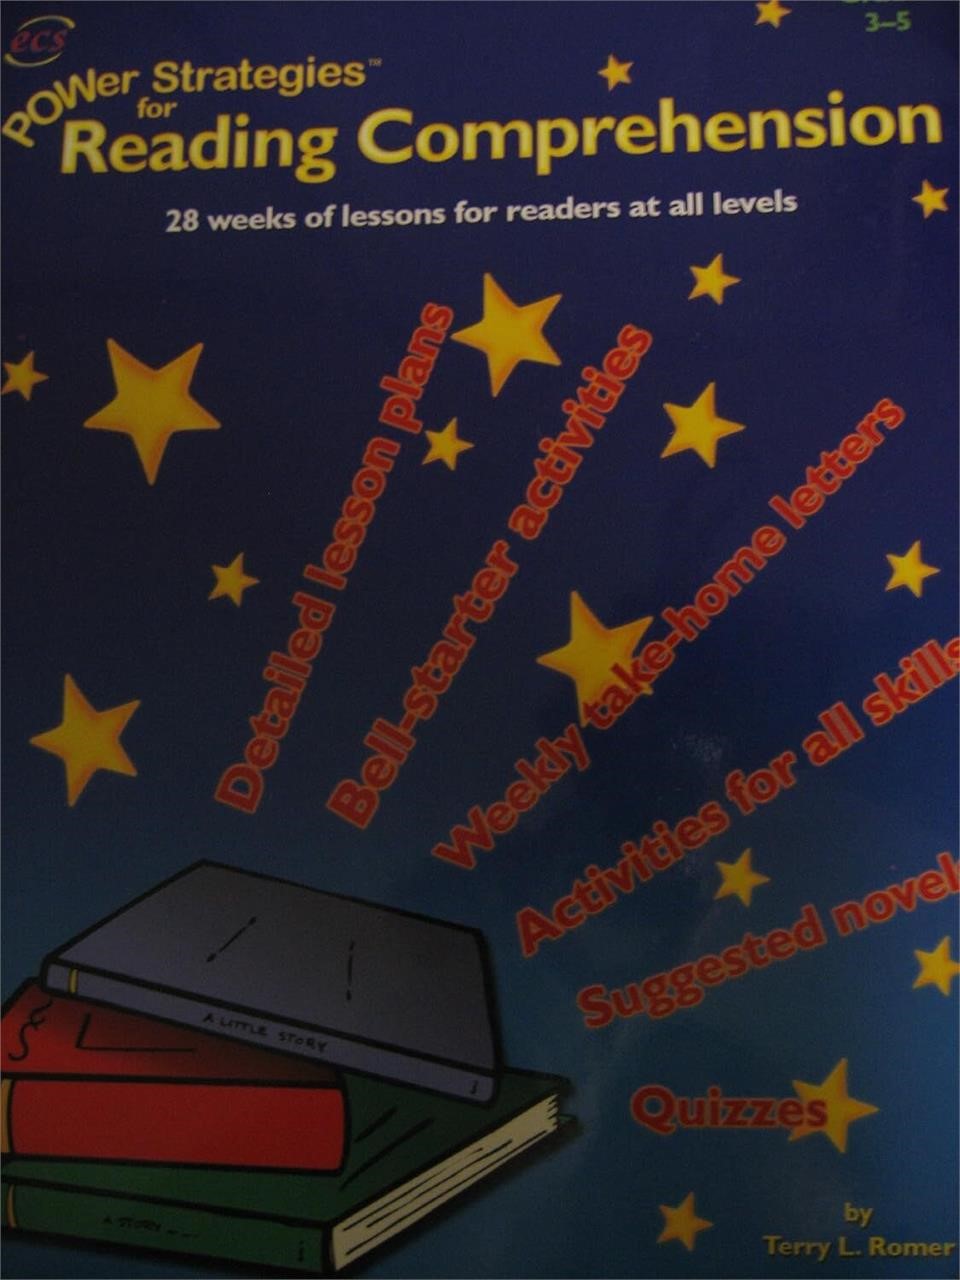 POWer Strategies for Reading Comprehension  Grades